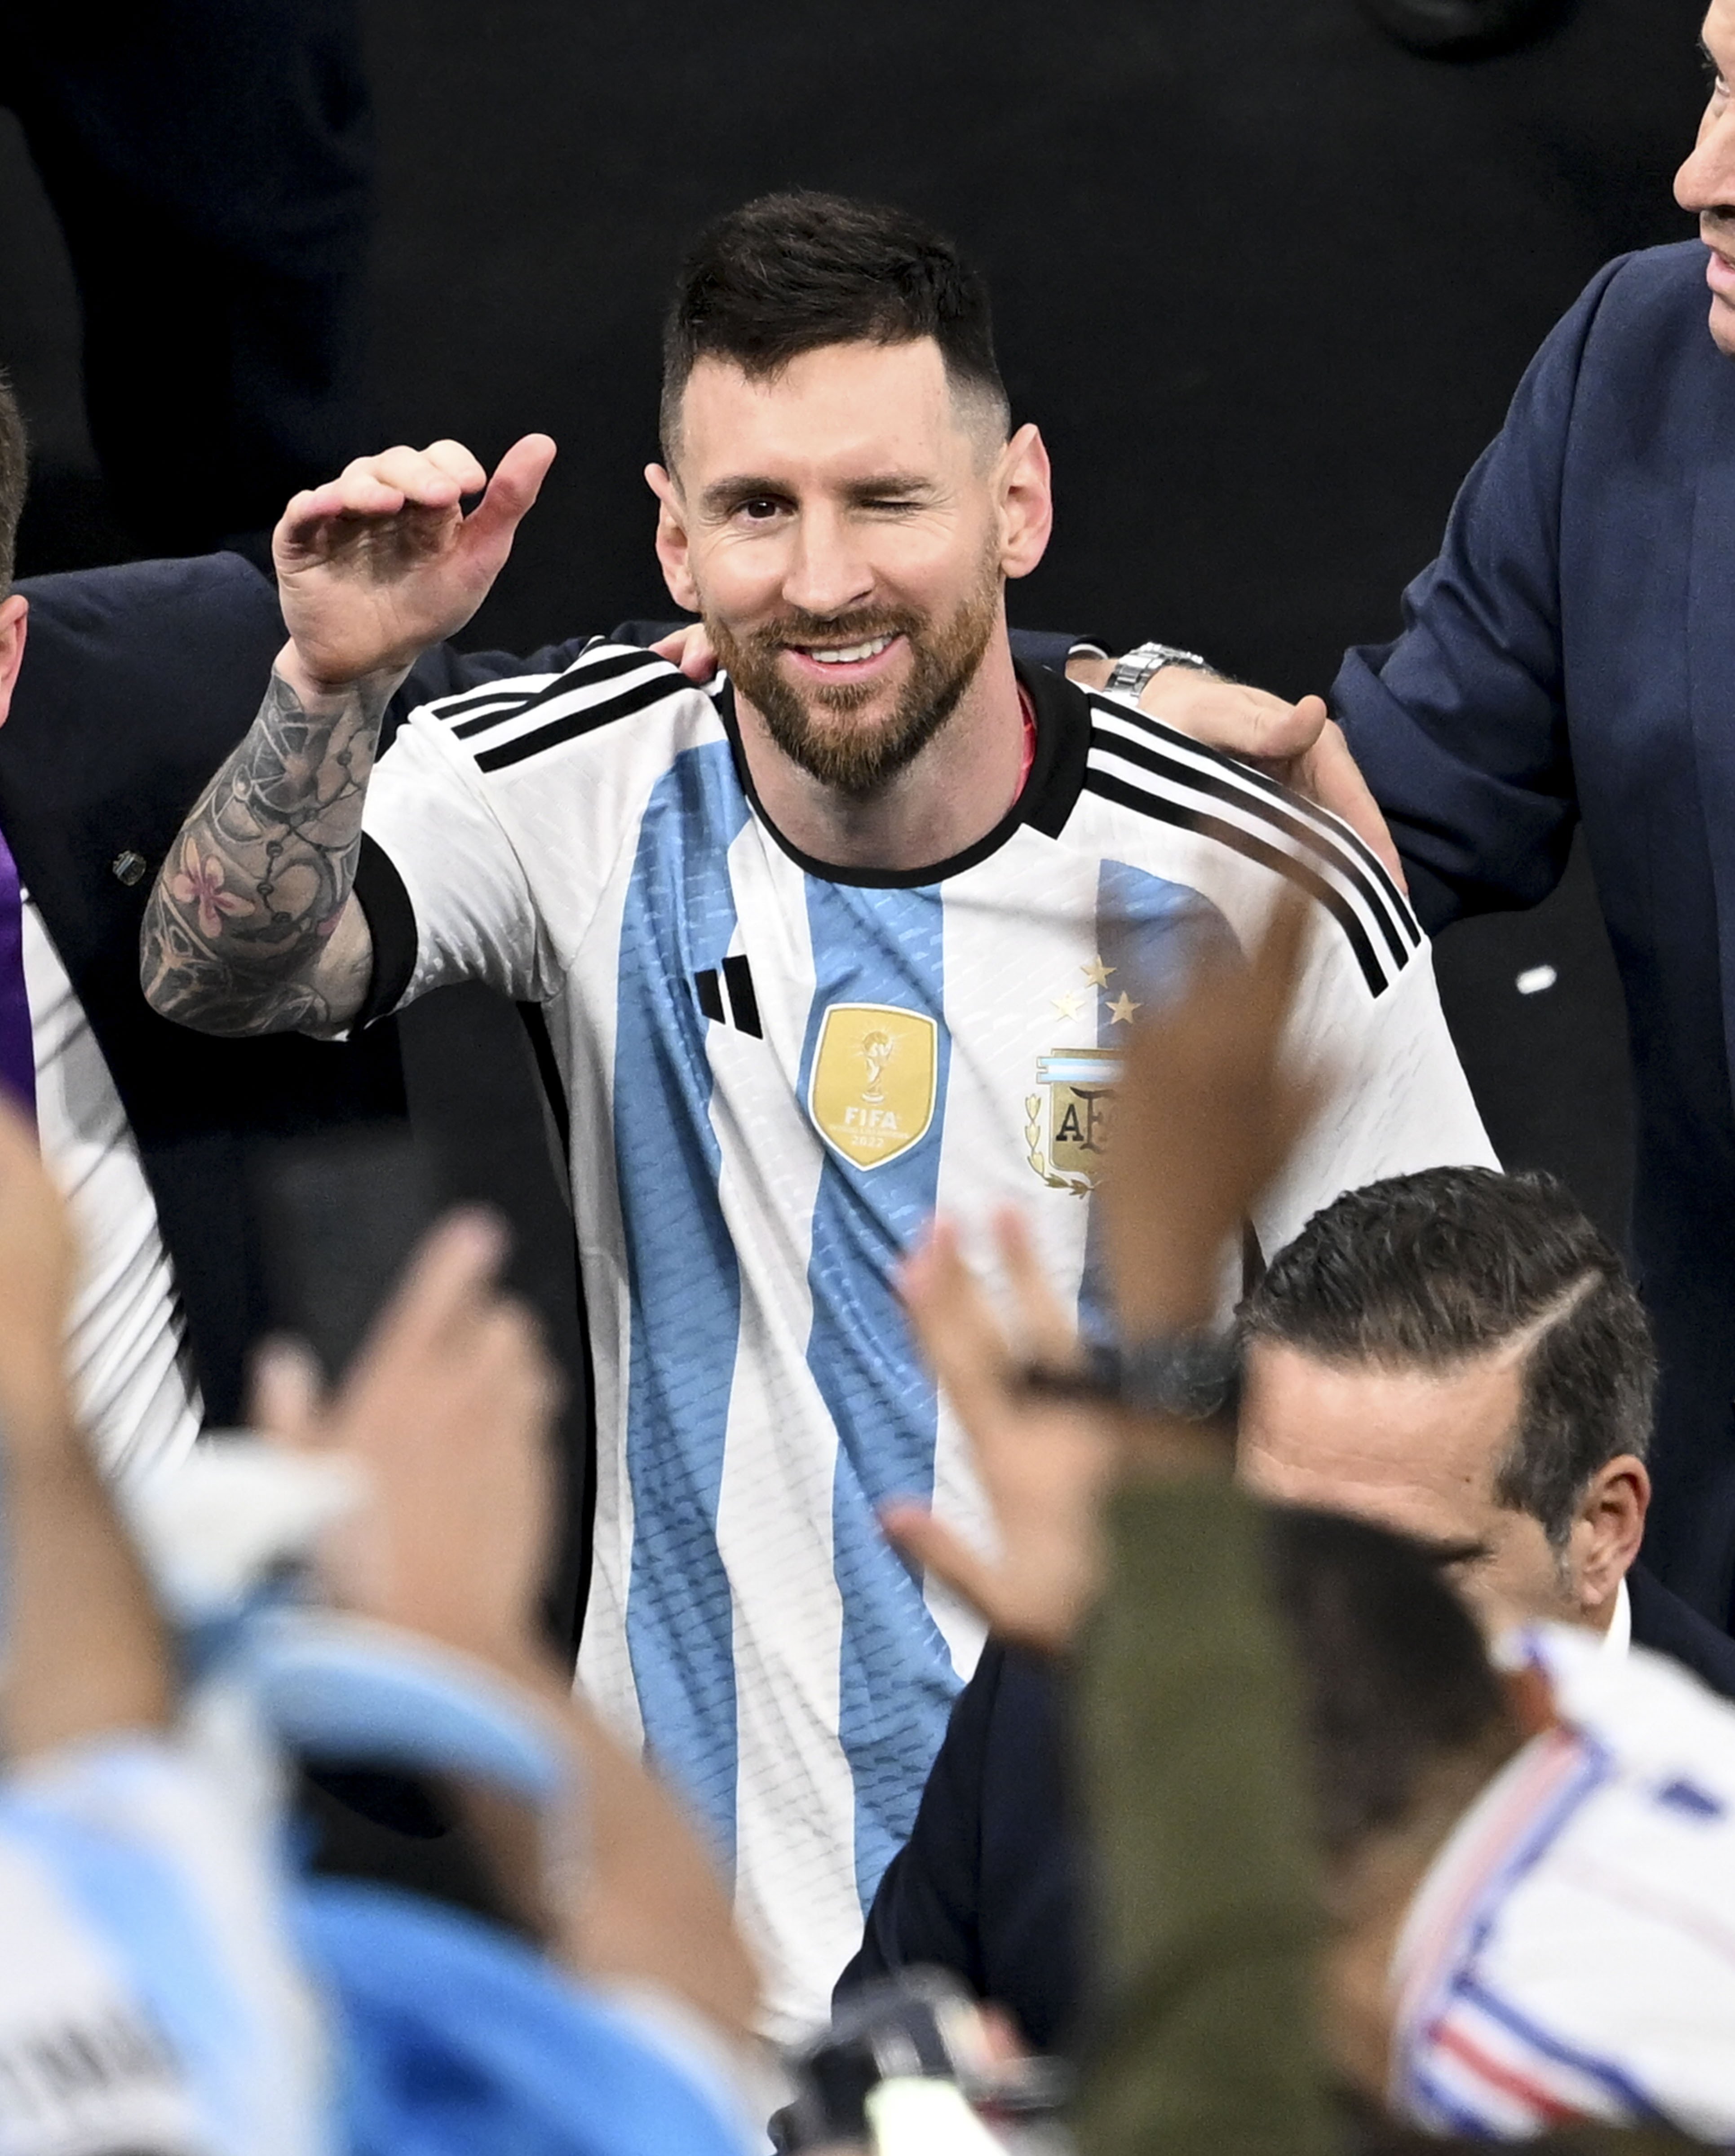 Lionel Messi of Argentina celebrates after scoring during the FIFA World Cup Final Match in Lusail City, Qatar on December 18, 2022 | Source: Getty Images